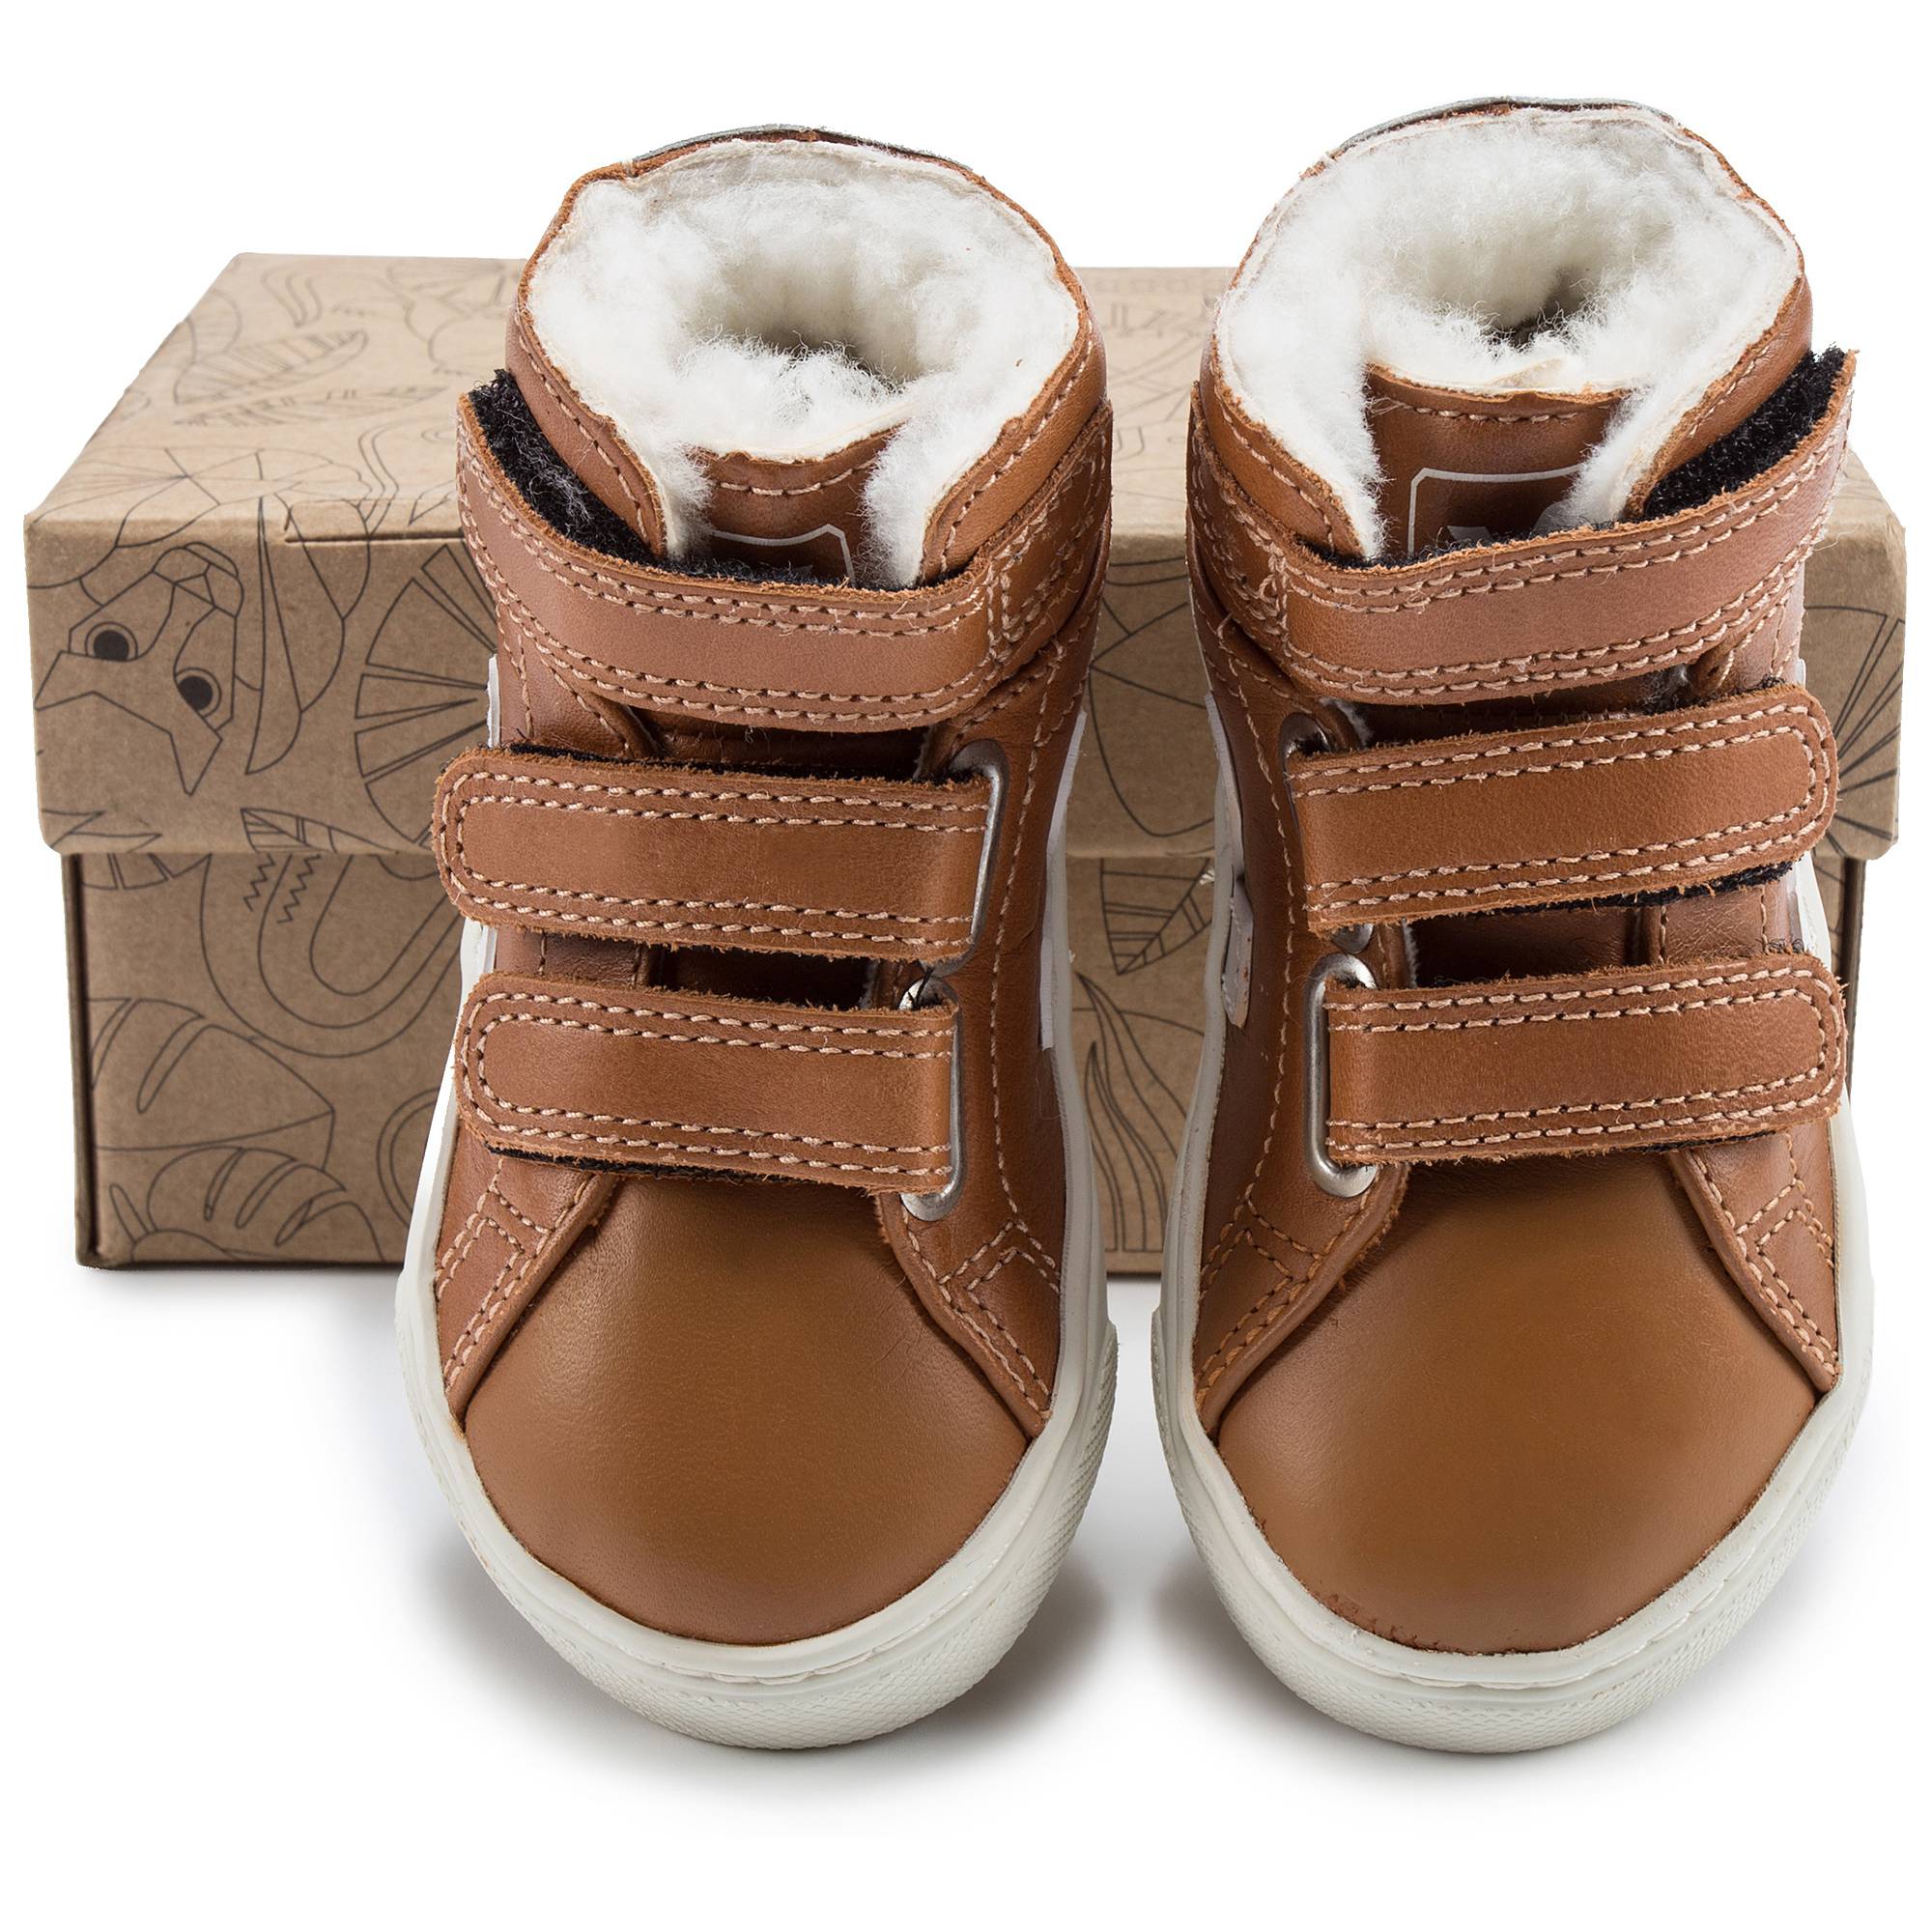 Baby Brown Leather Velcro High Top Shoes